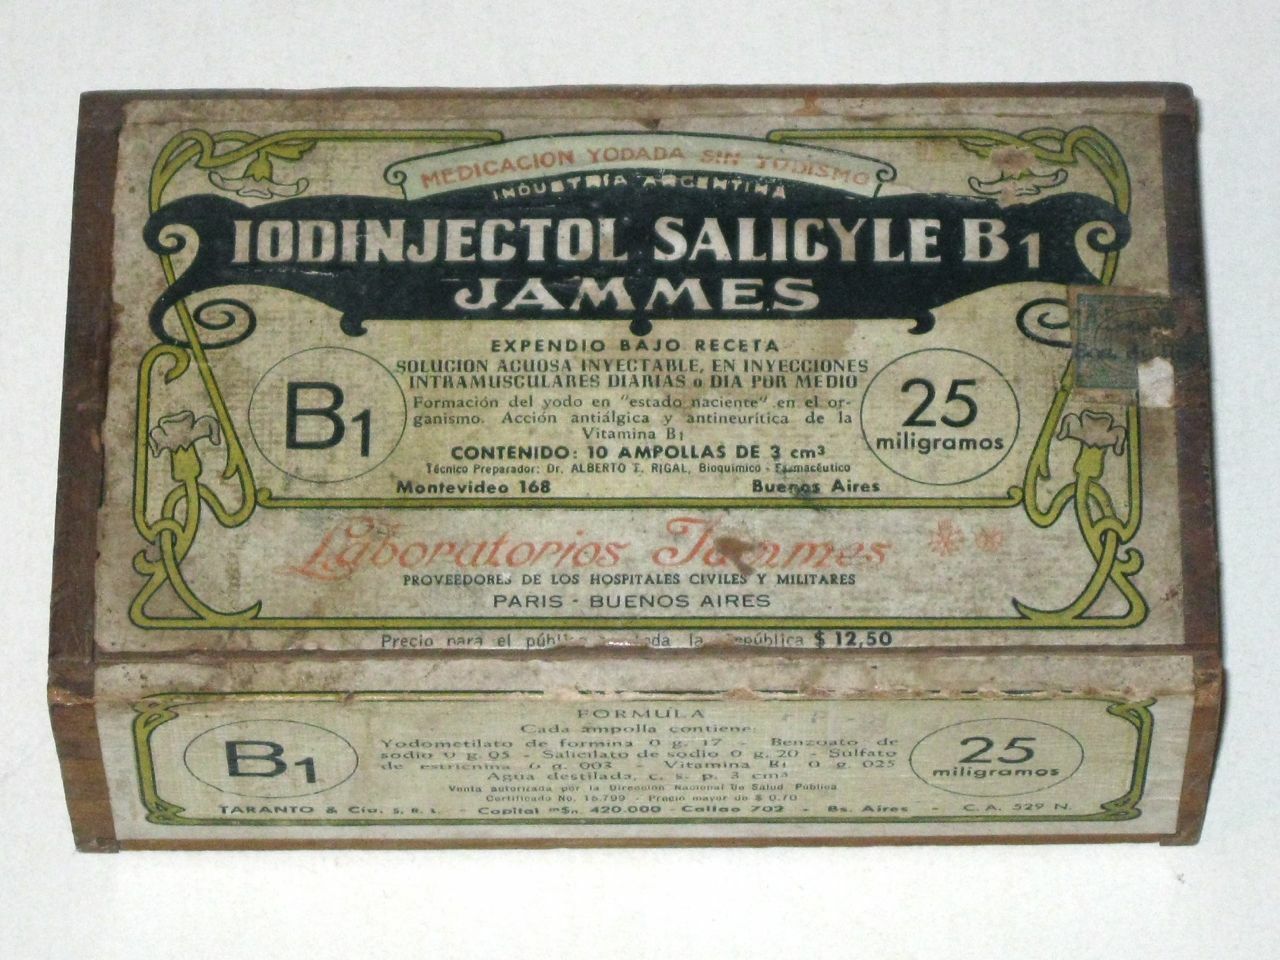 Antique IODINJECTOL Salicycle B1 Jammes WOODEN Advertising BOX Argentina Ampoule